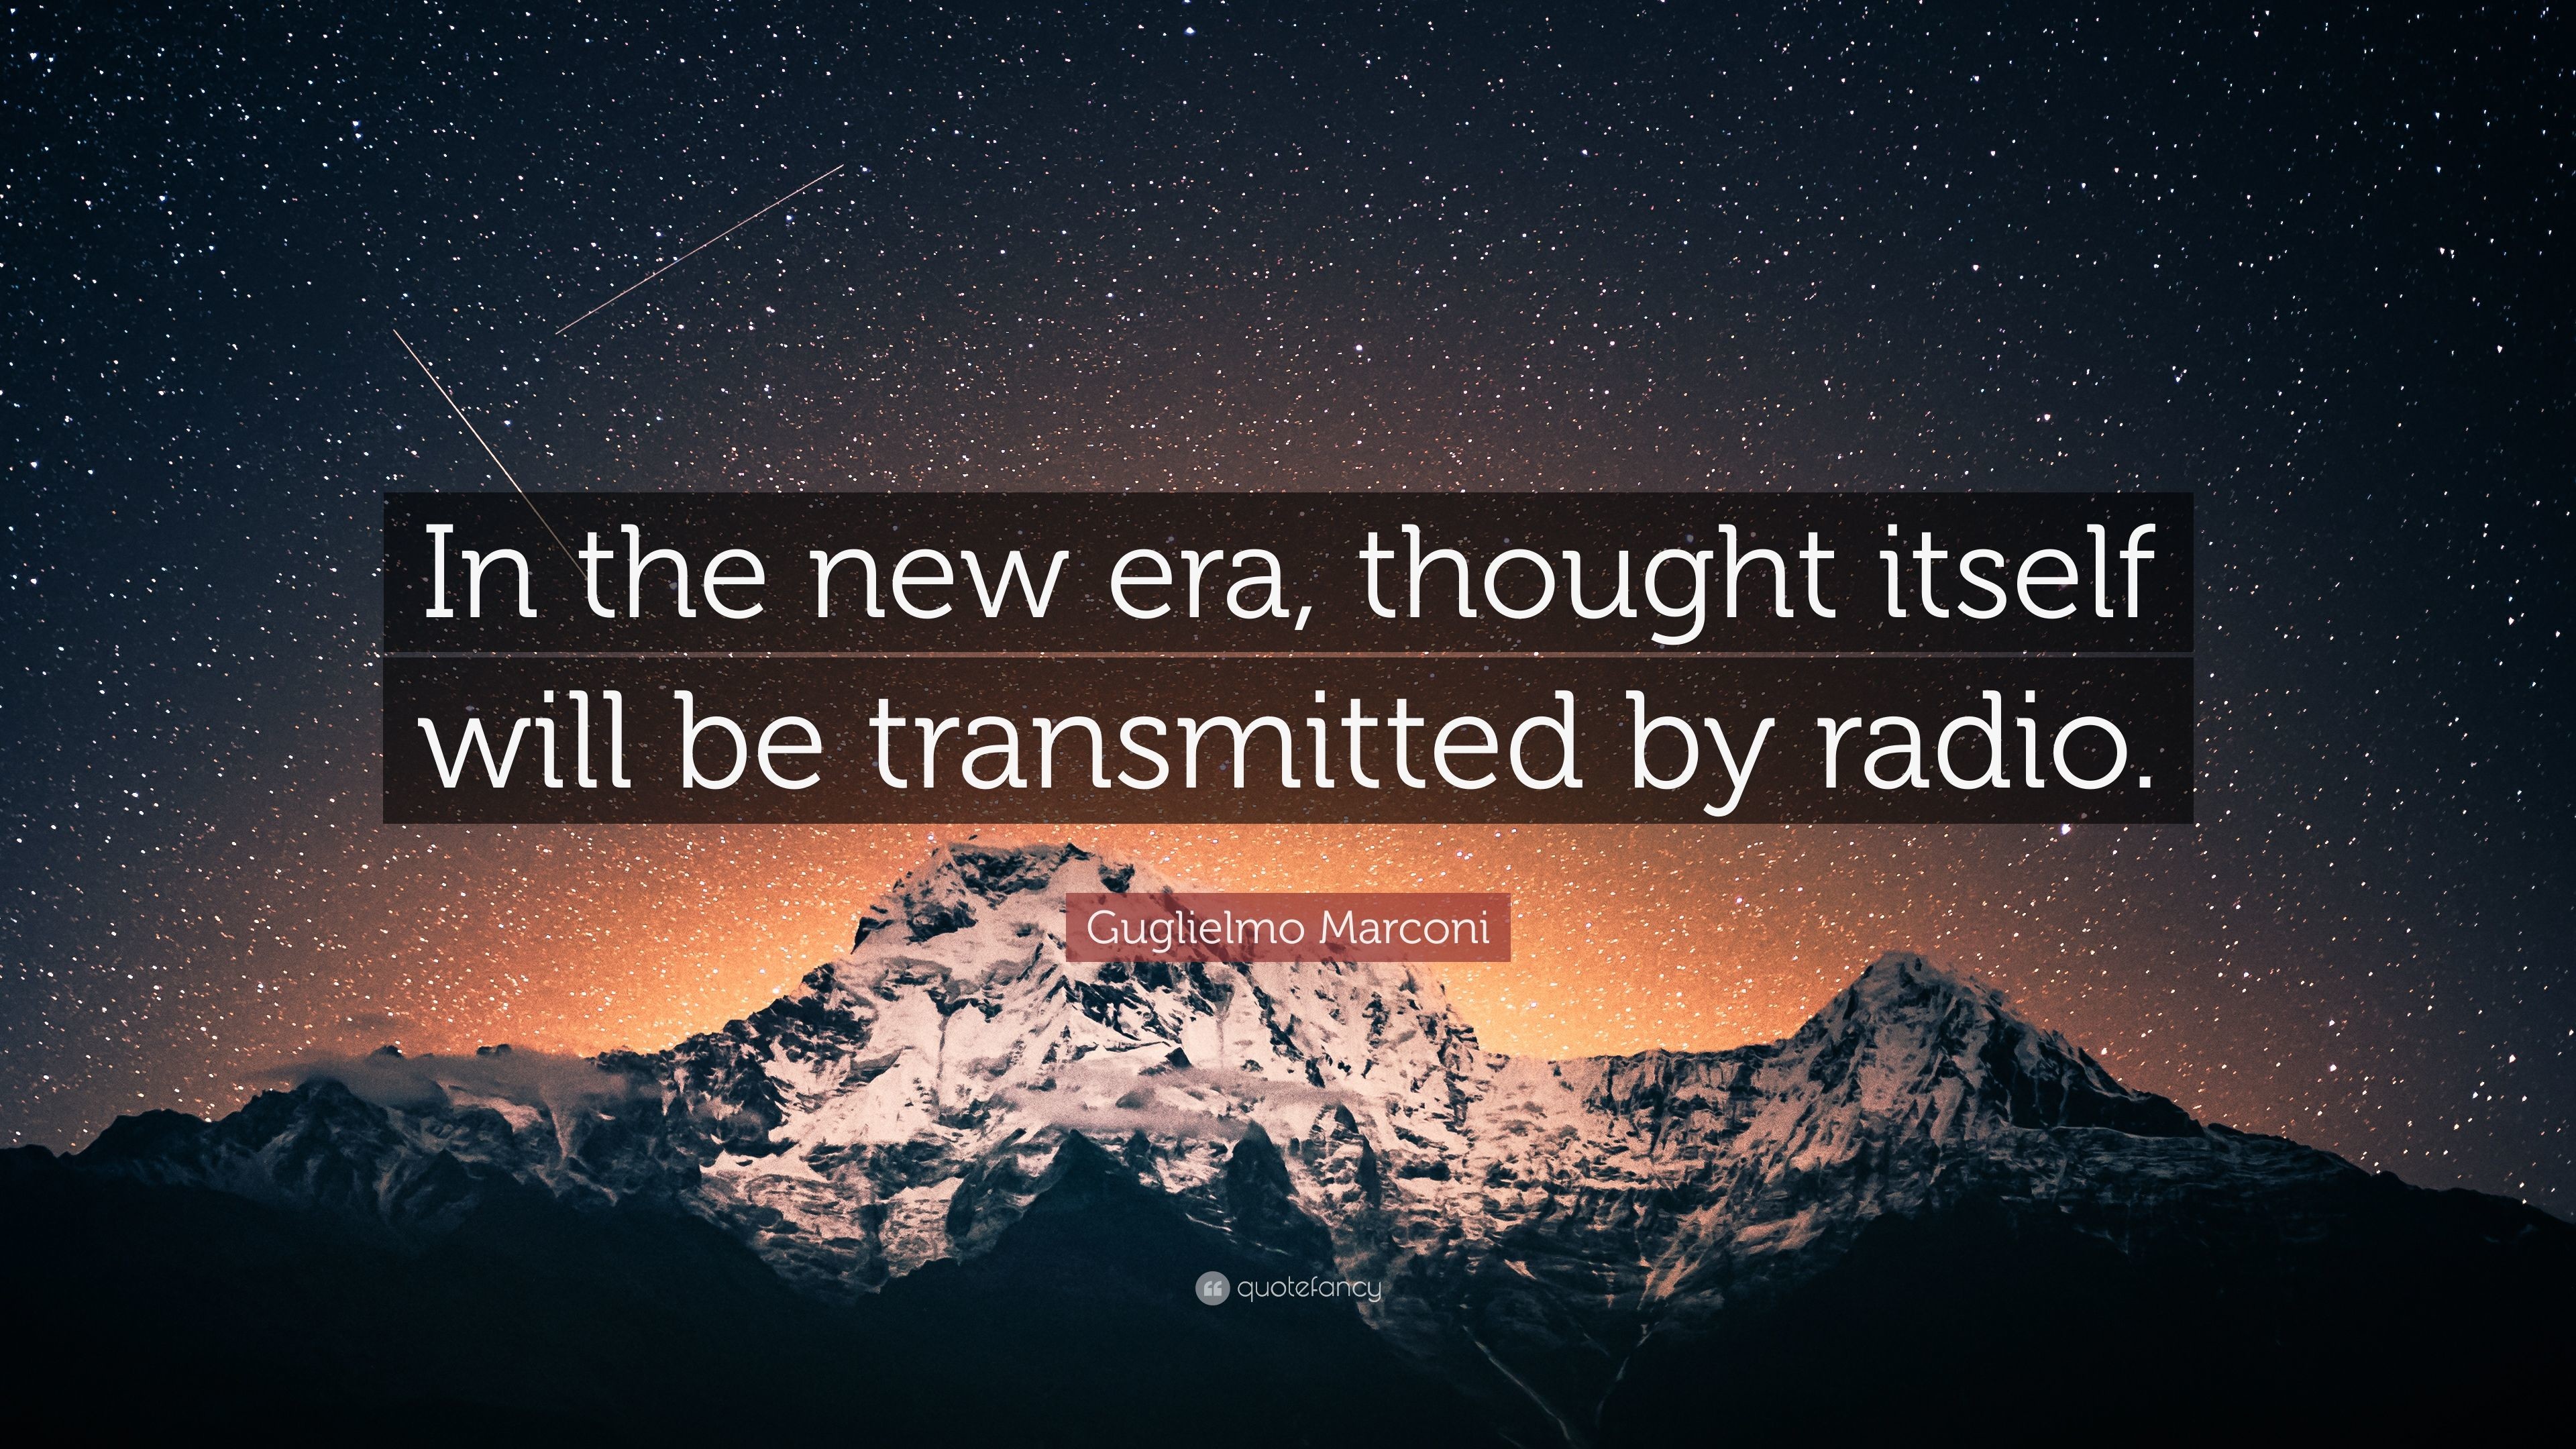 3840x2160 Guglielmo Marconi Quote: “In the new era, thought itself will be  transmitted by